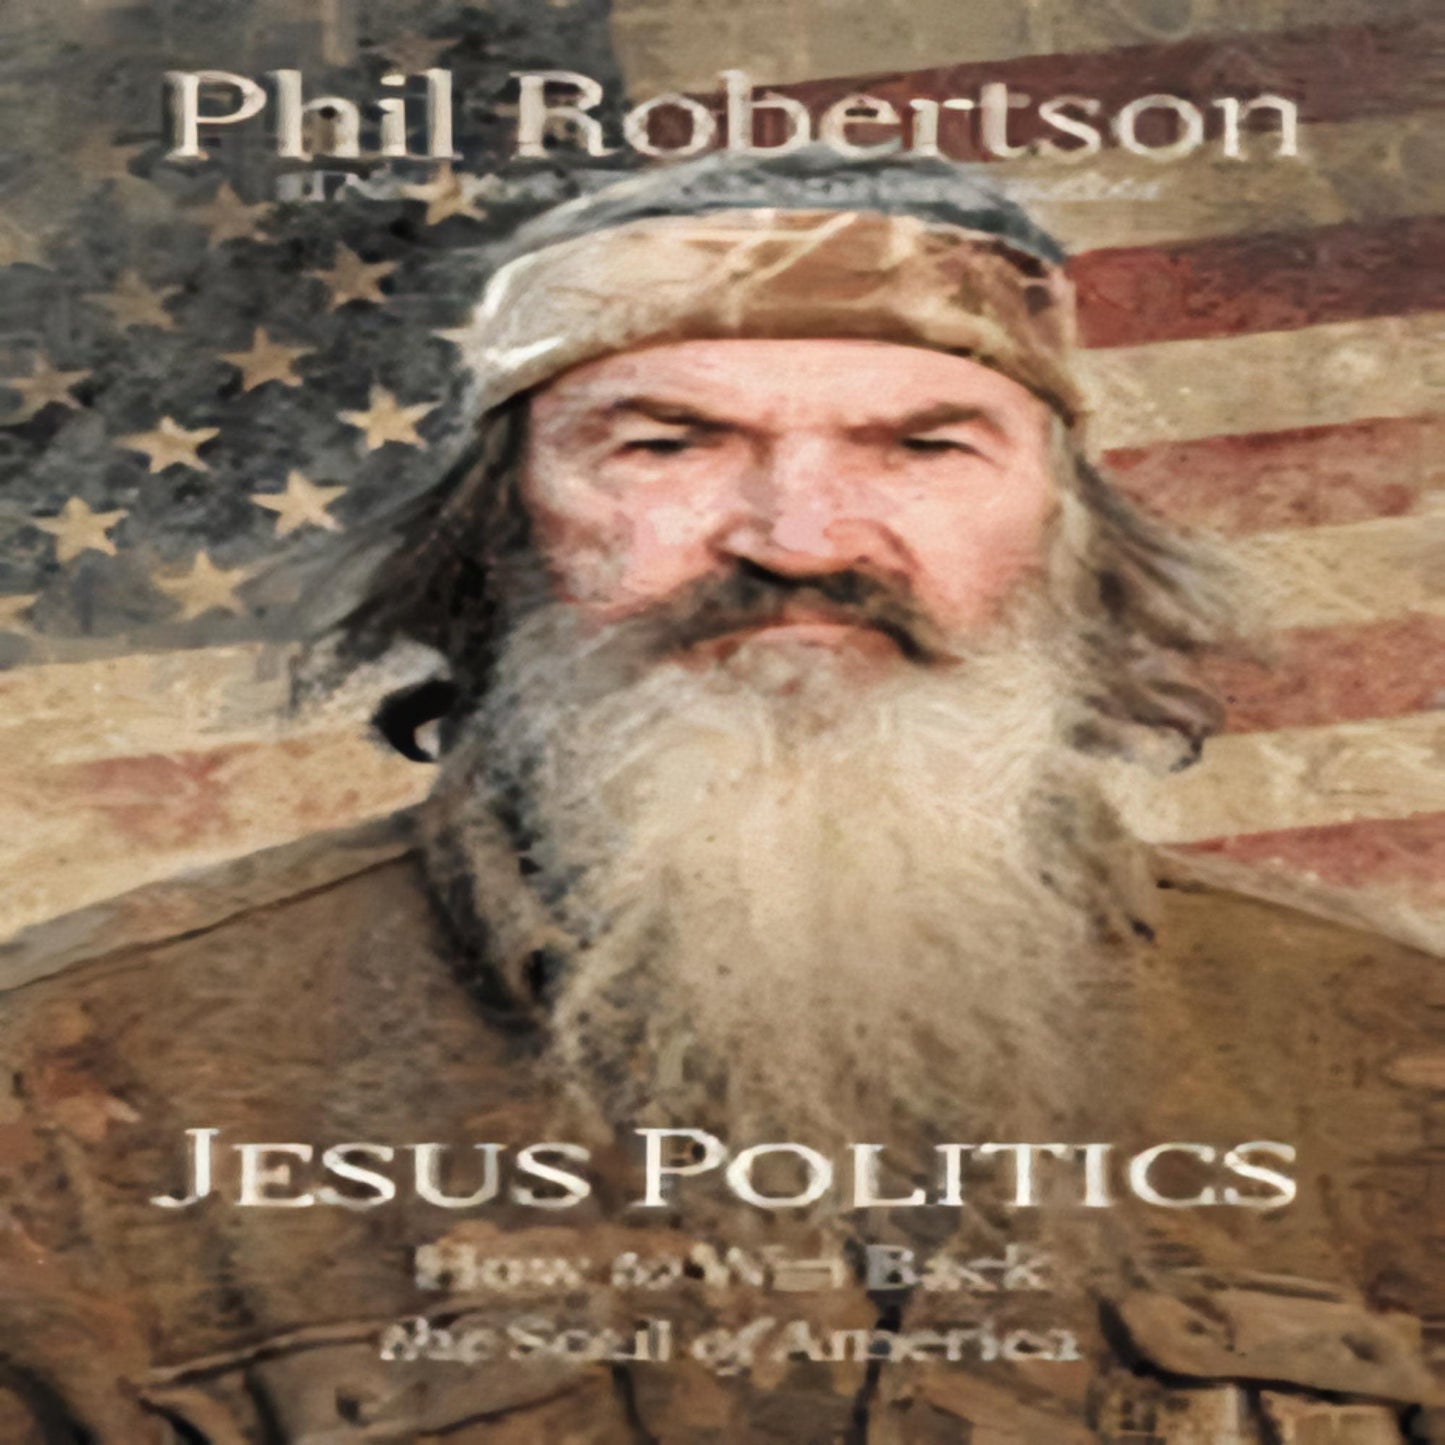 Jesus Politics: How to Win Back the Soul of America78-021423-1400210062DPGBOOKSTORE.COM. Today's Bestsellers.